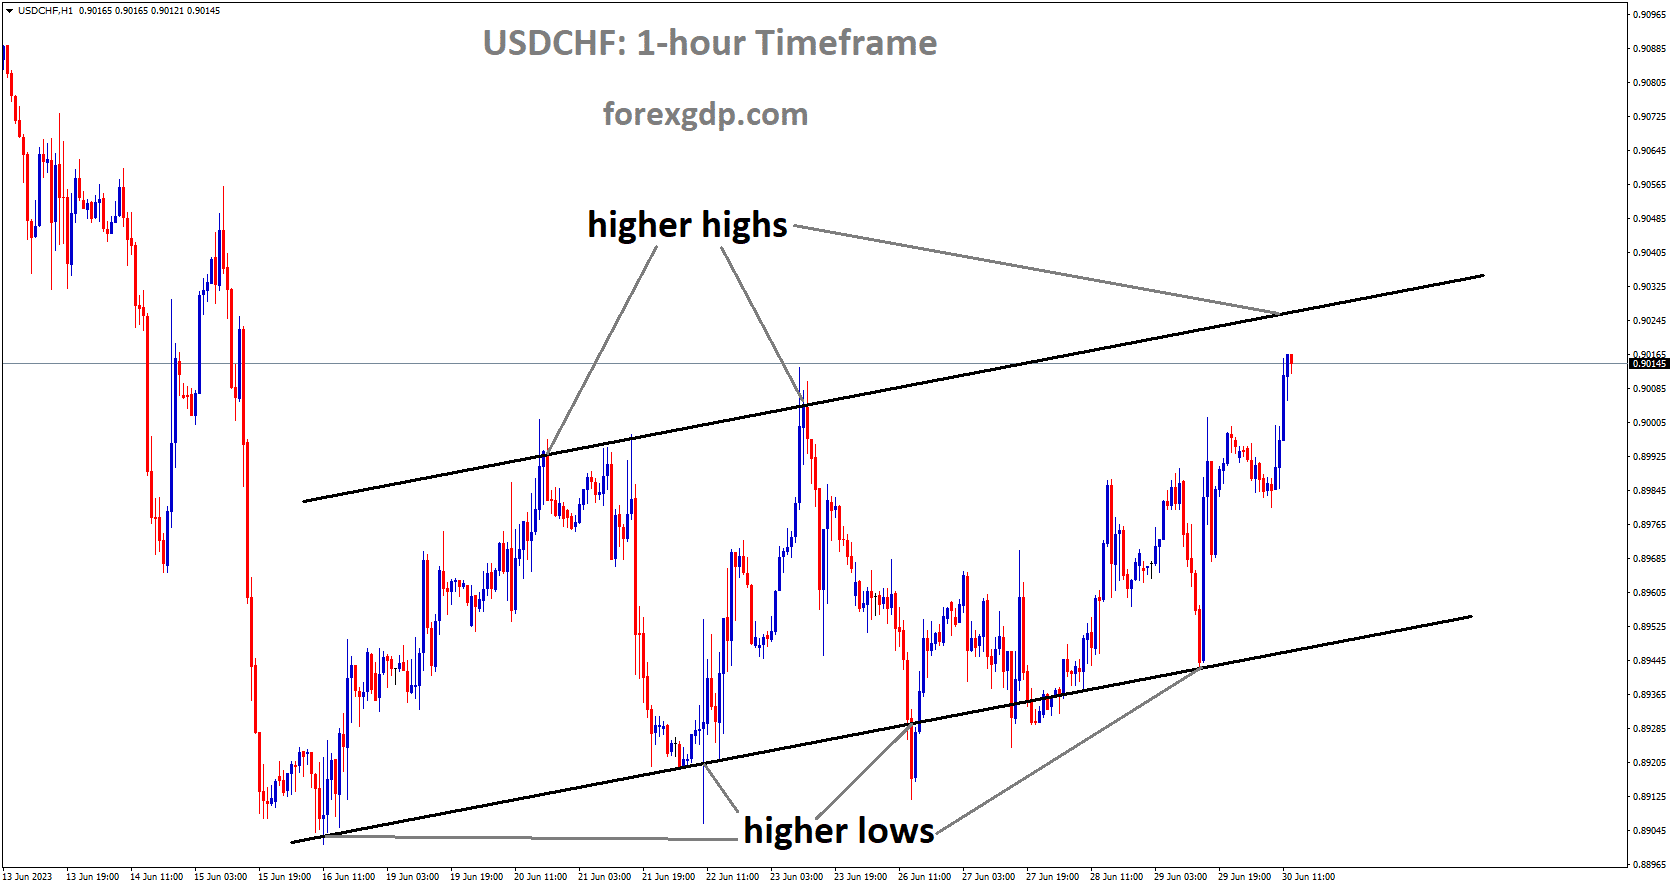 USDCHF is moving an Ascending channel and the market has reached the higher high area of the channel.